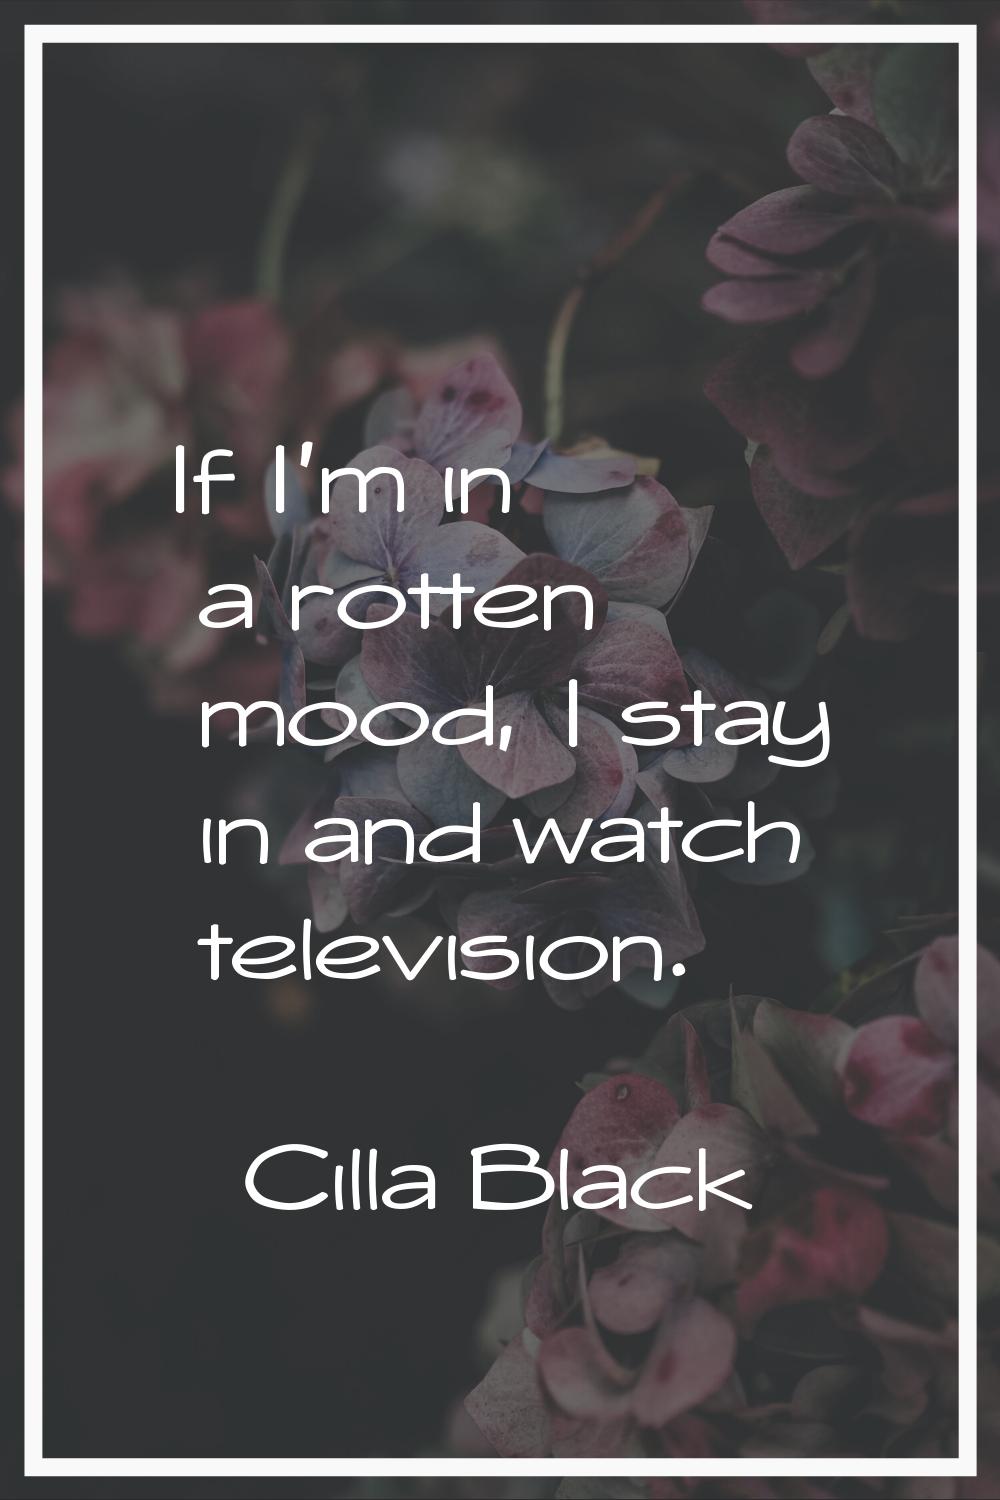 If I'm in a rotten mood, I stay in and watch television.